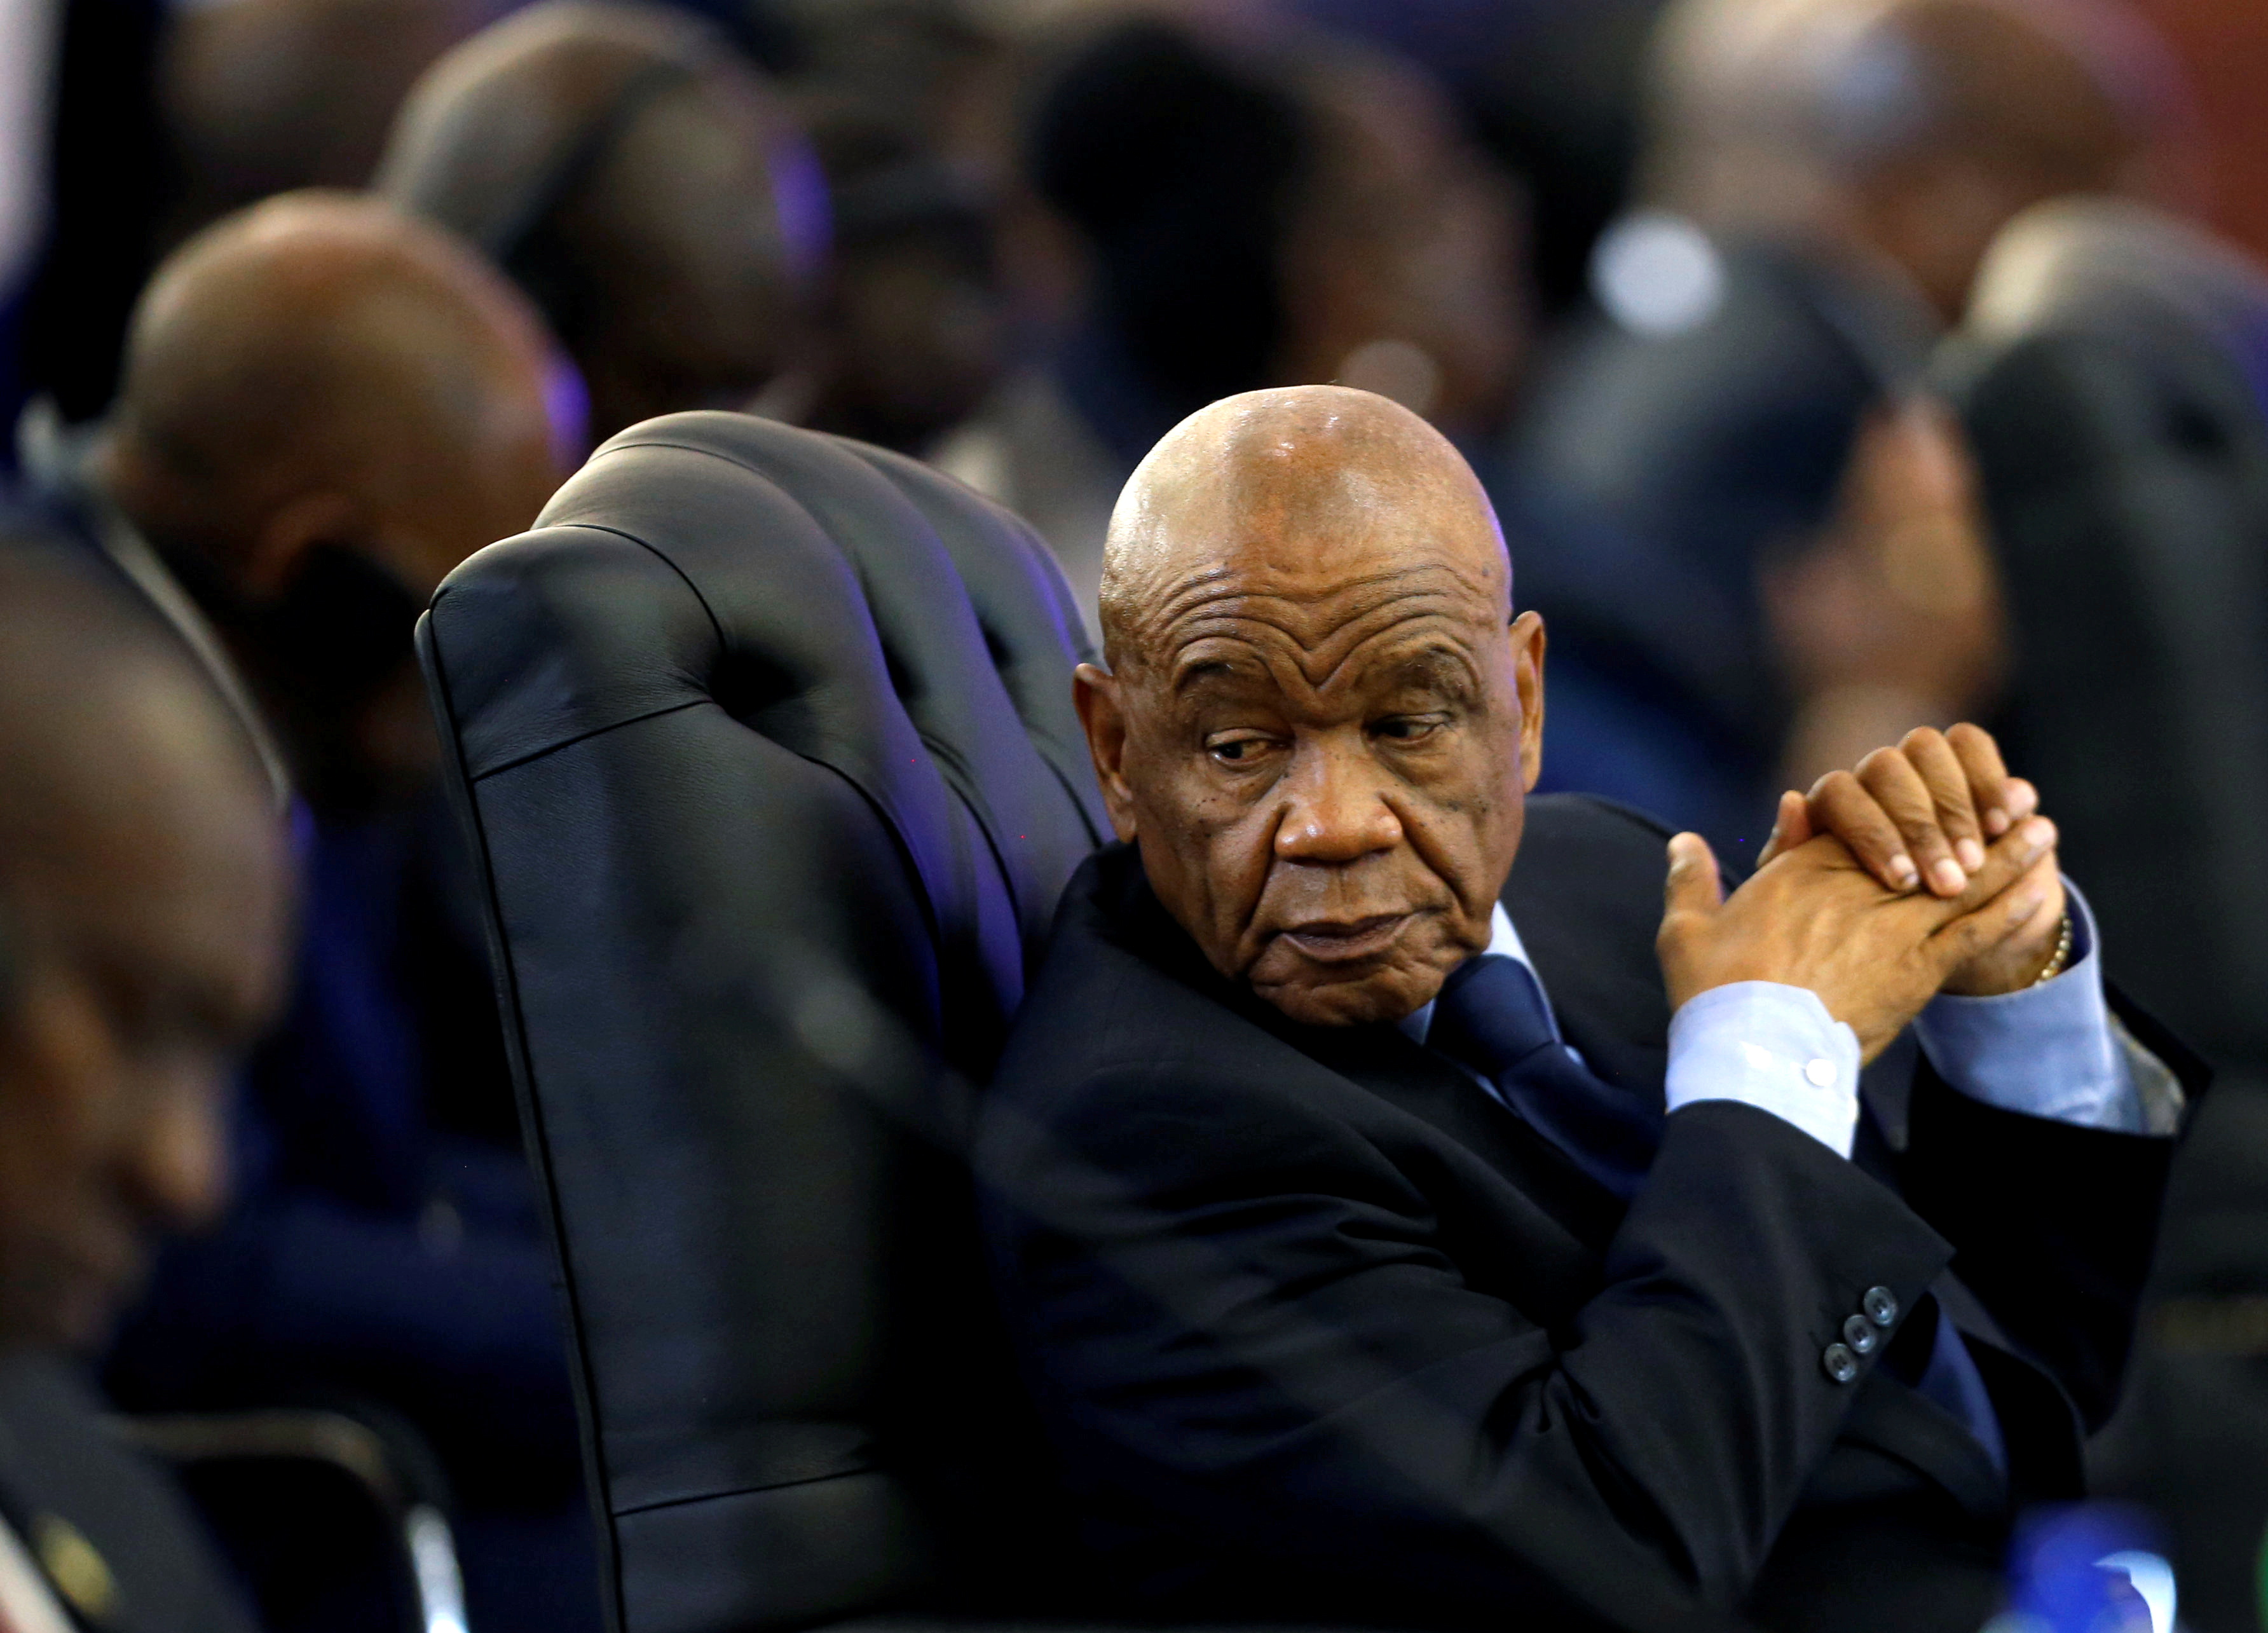  Thomas Thabane attends the 37th Ordinary SADC Summit of Heads of State and Government in Pretoria, South Africa August 19, 2017. At the time, he was Lesotho's prime minister REUTERS/Siphiwe Sibeko/File Photo